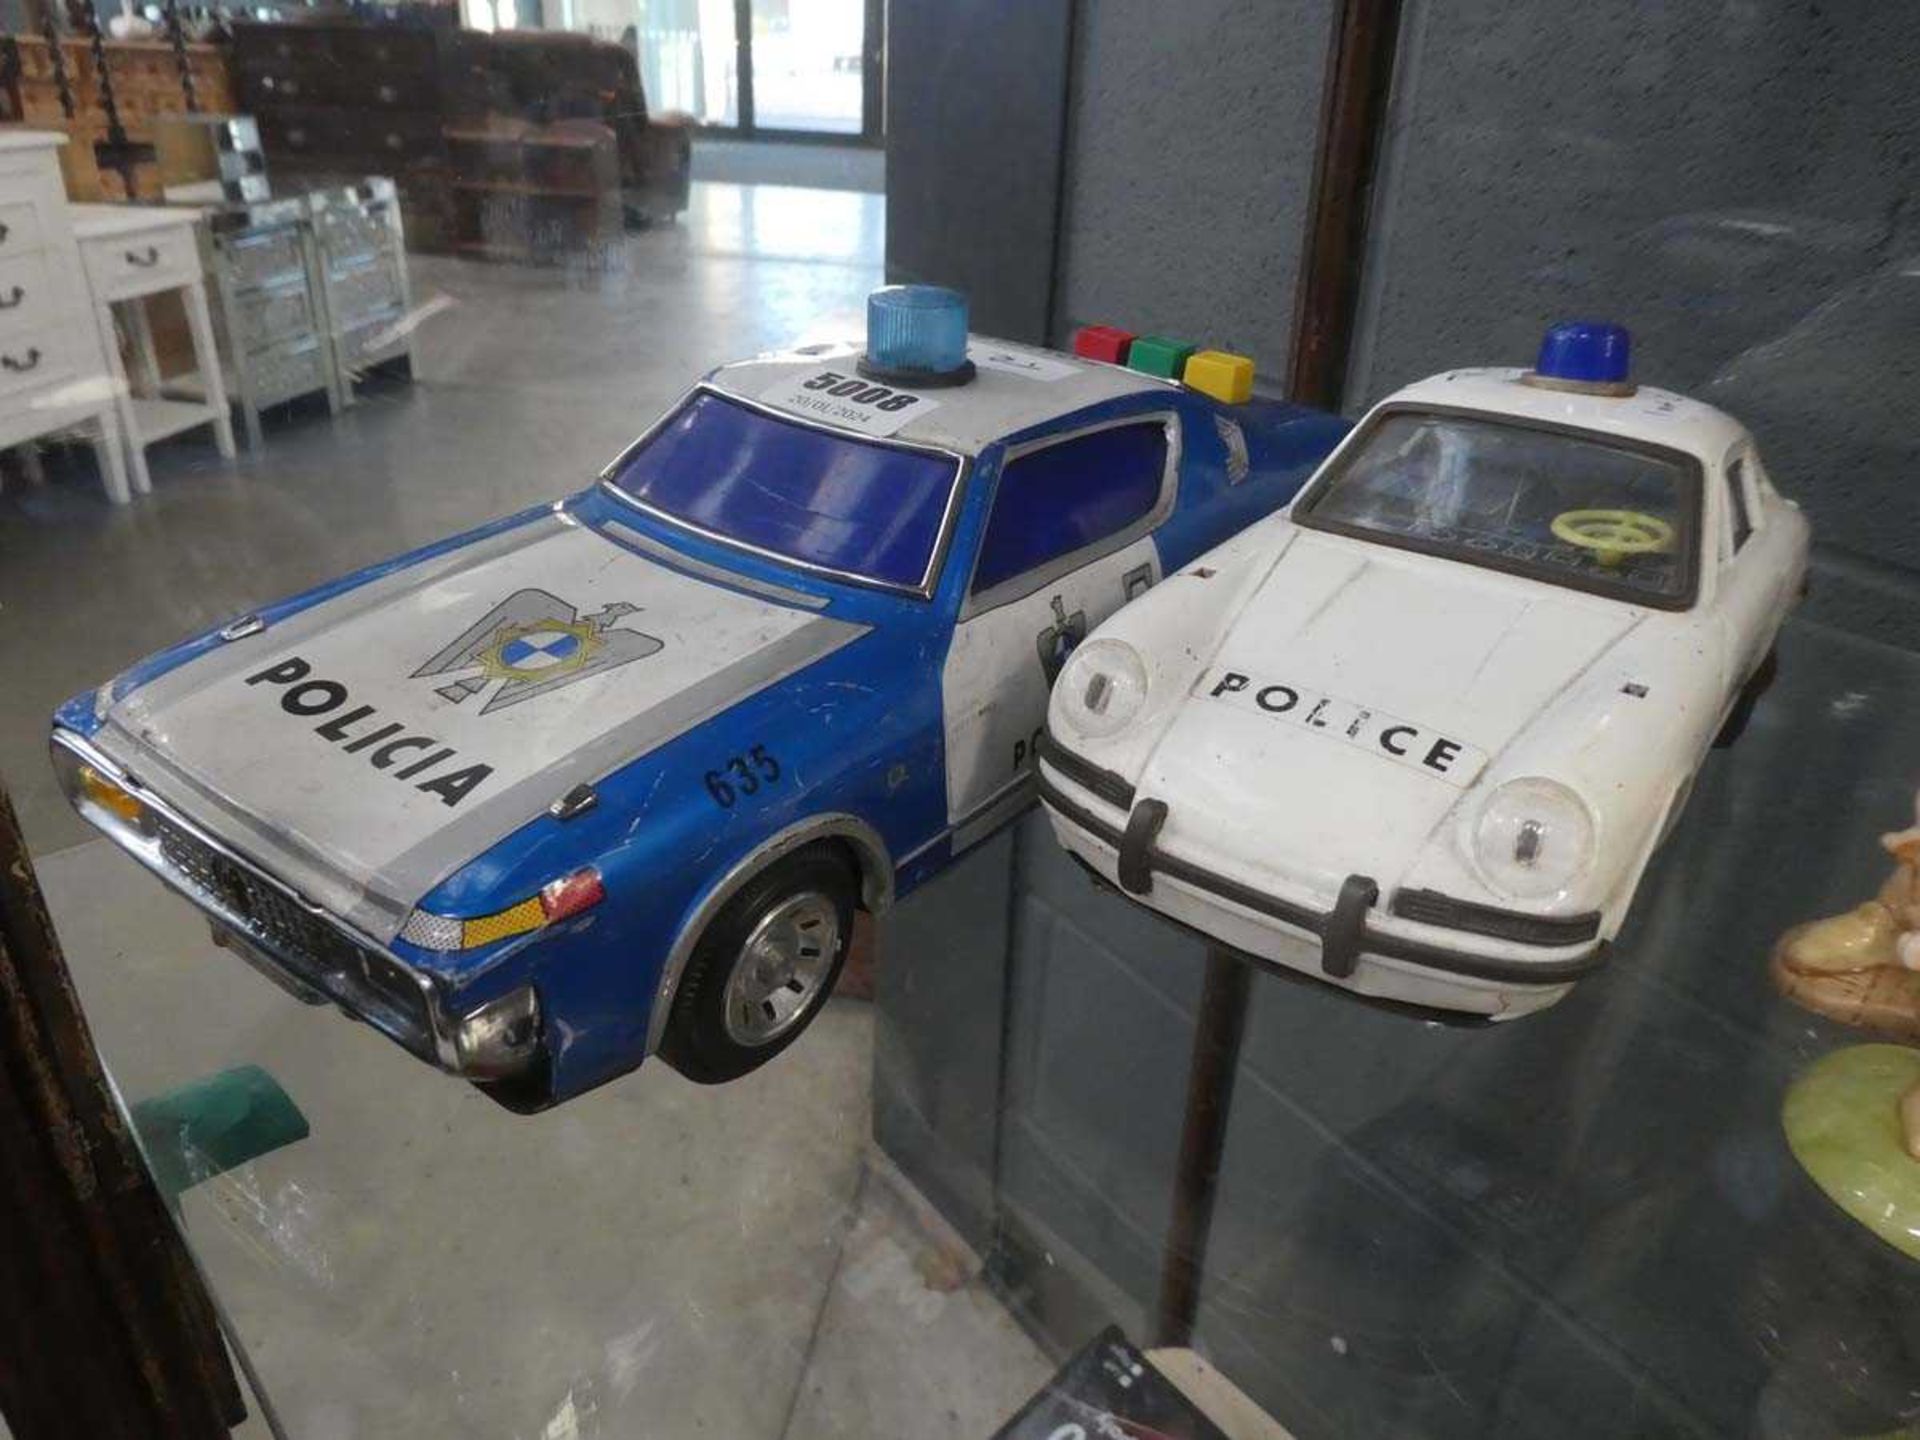 Two tin plate police cars